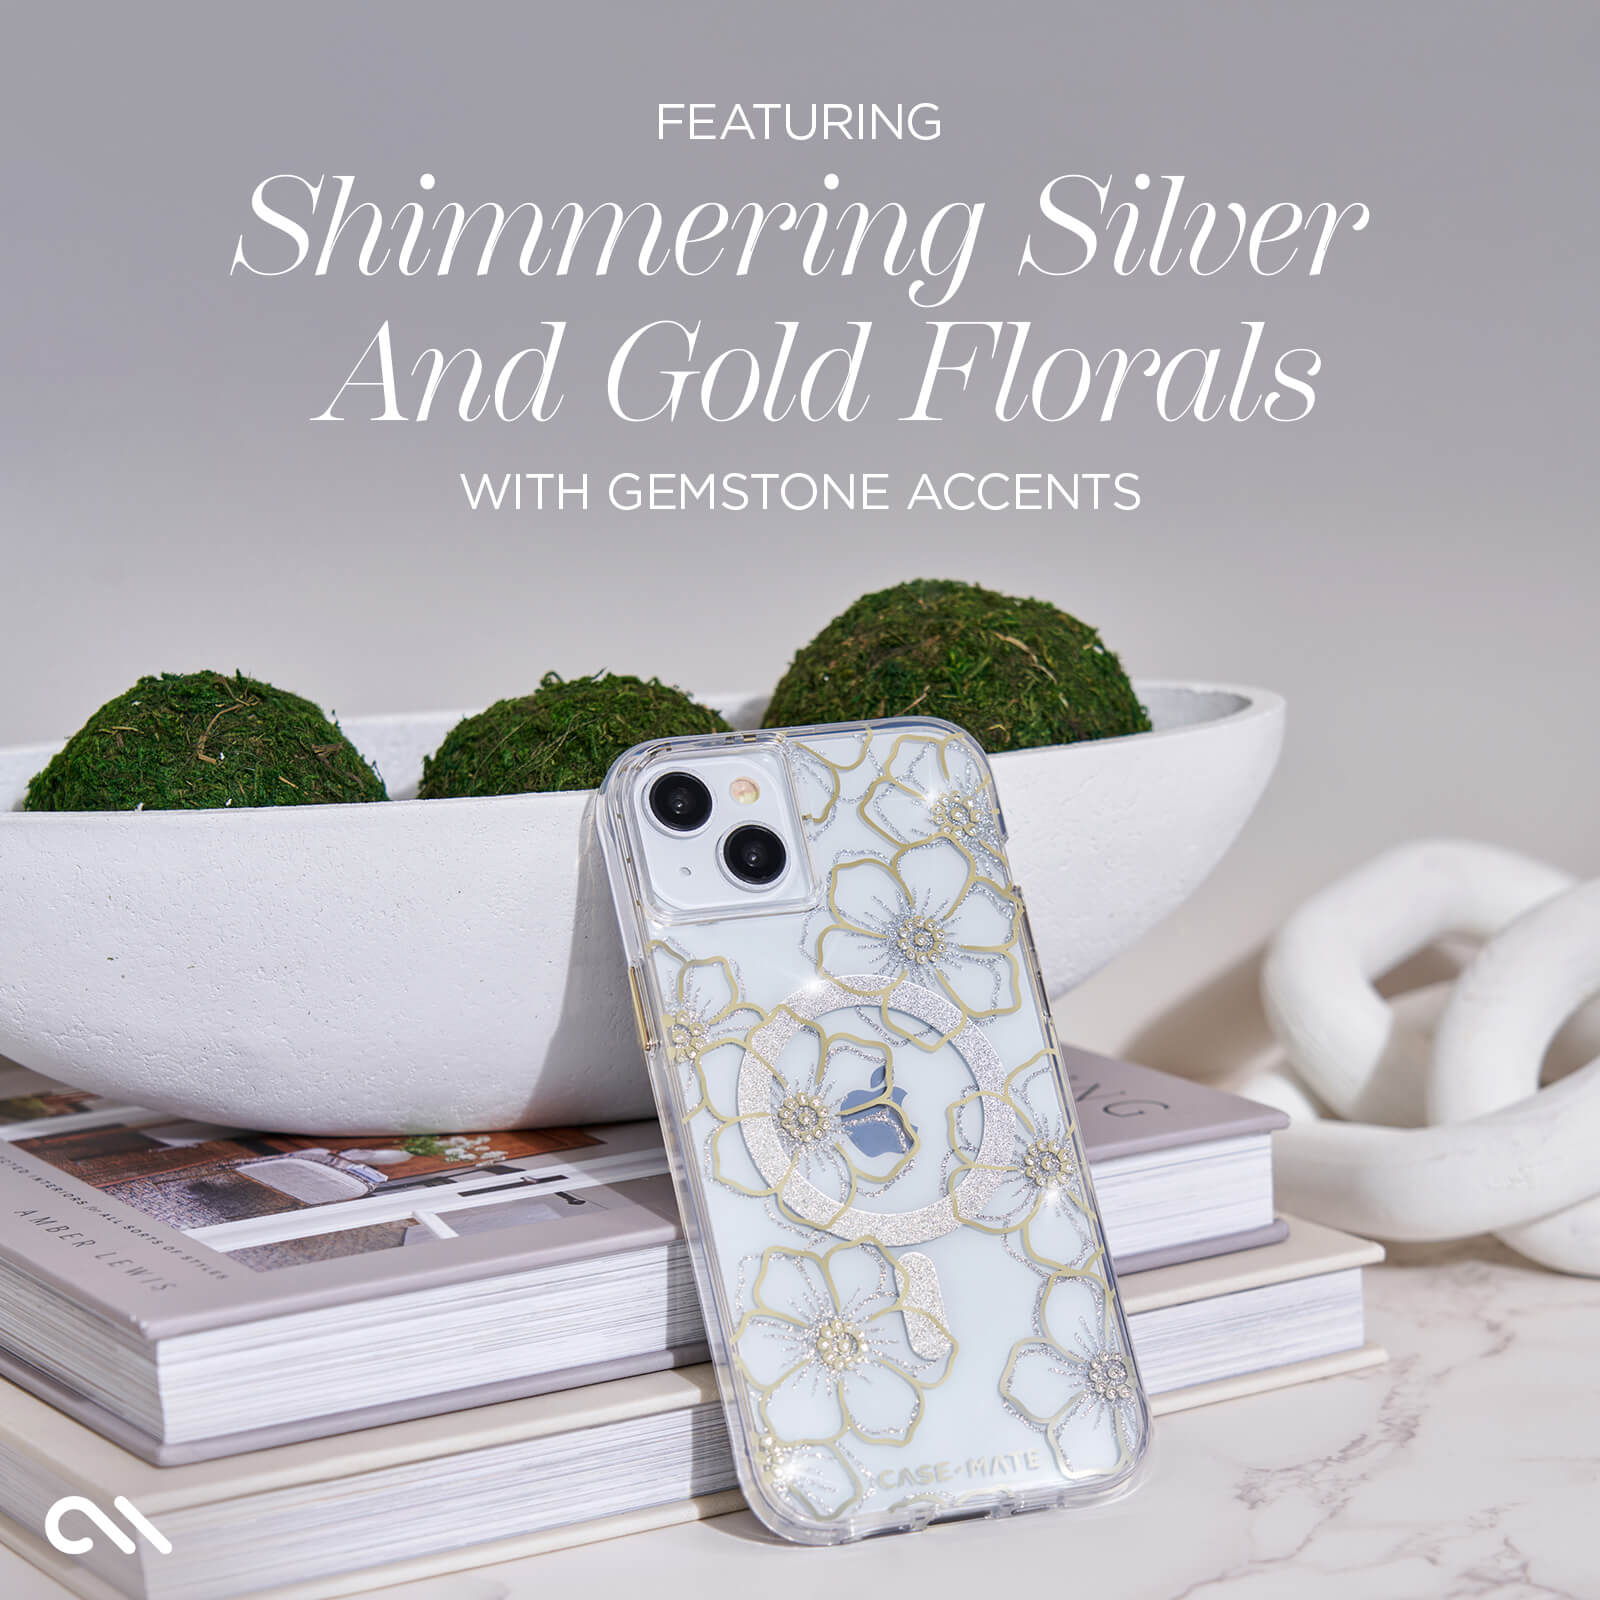 FEATURING SHIMMERING SILVER AND GOLD FLORALS WITH GEMSTONES ACCENTS